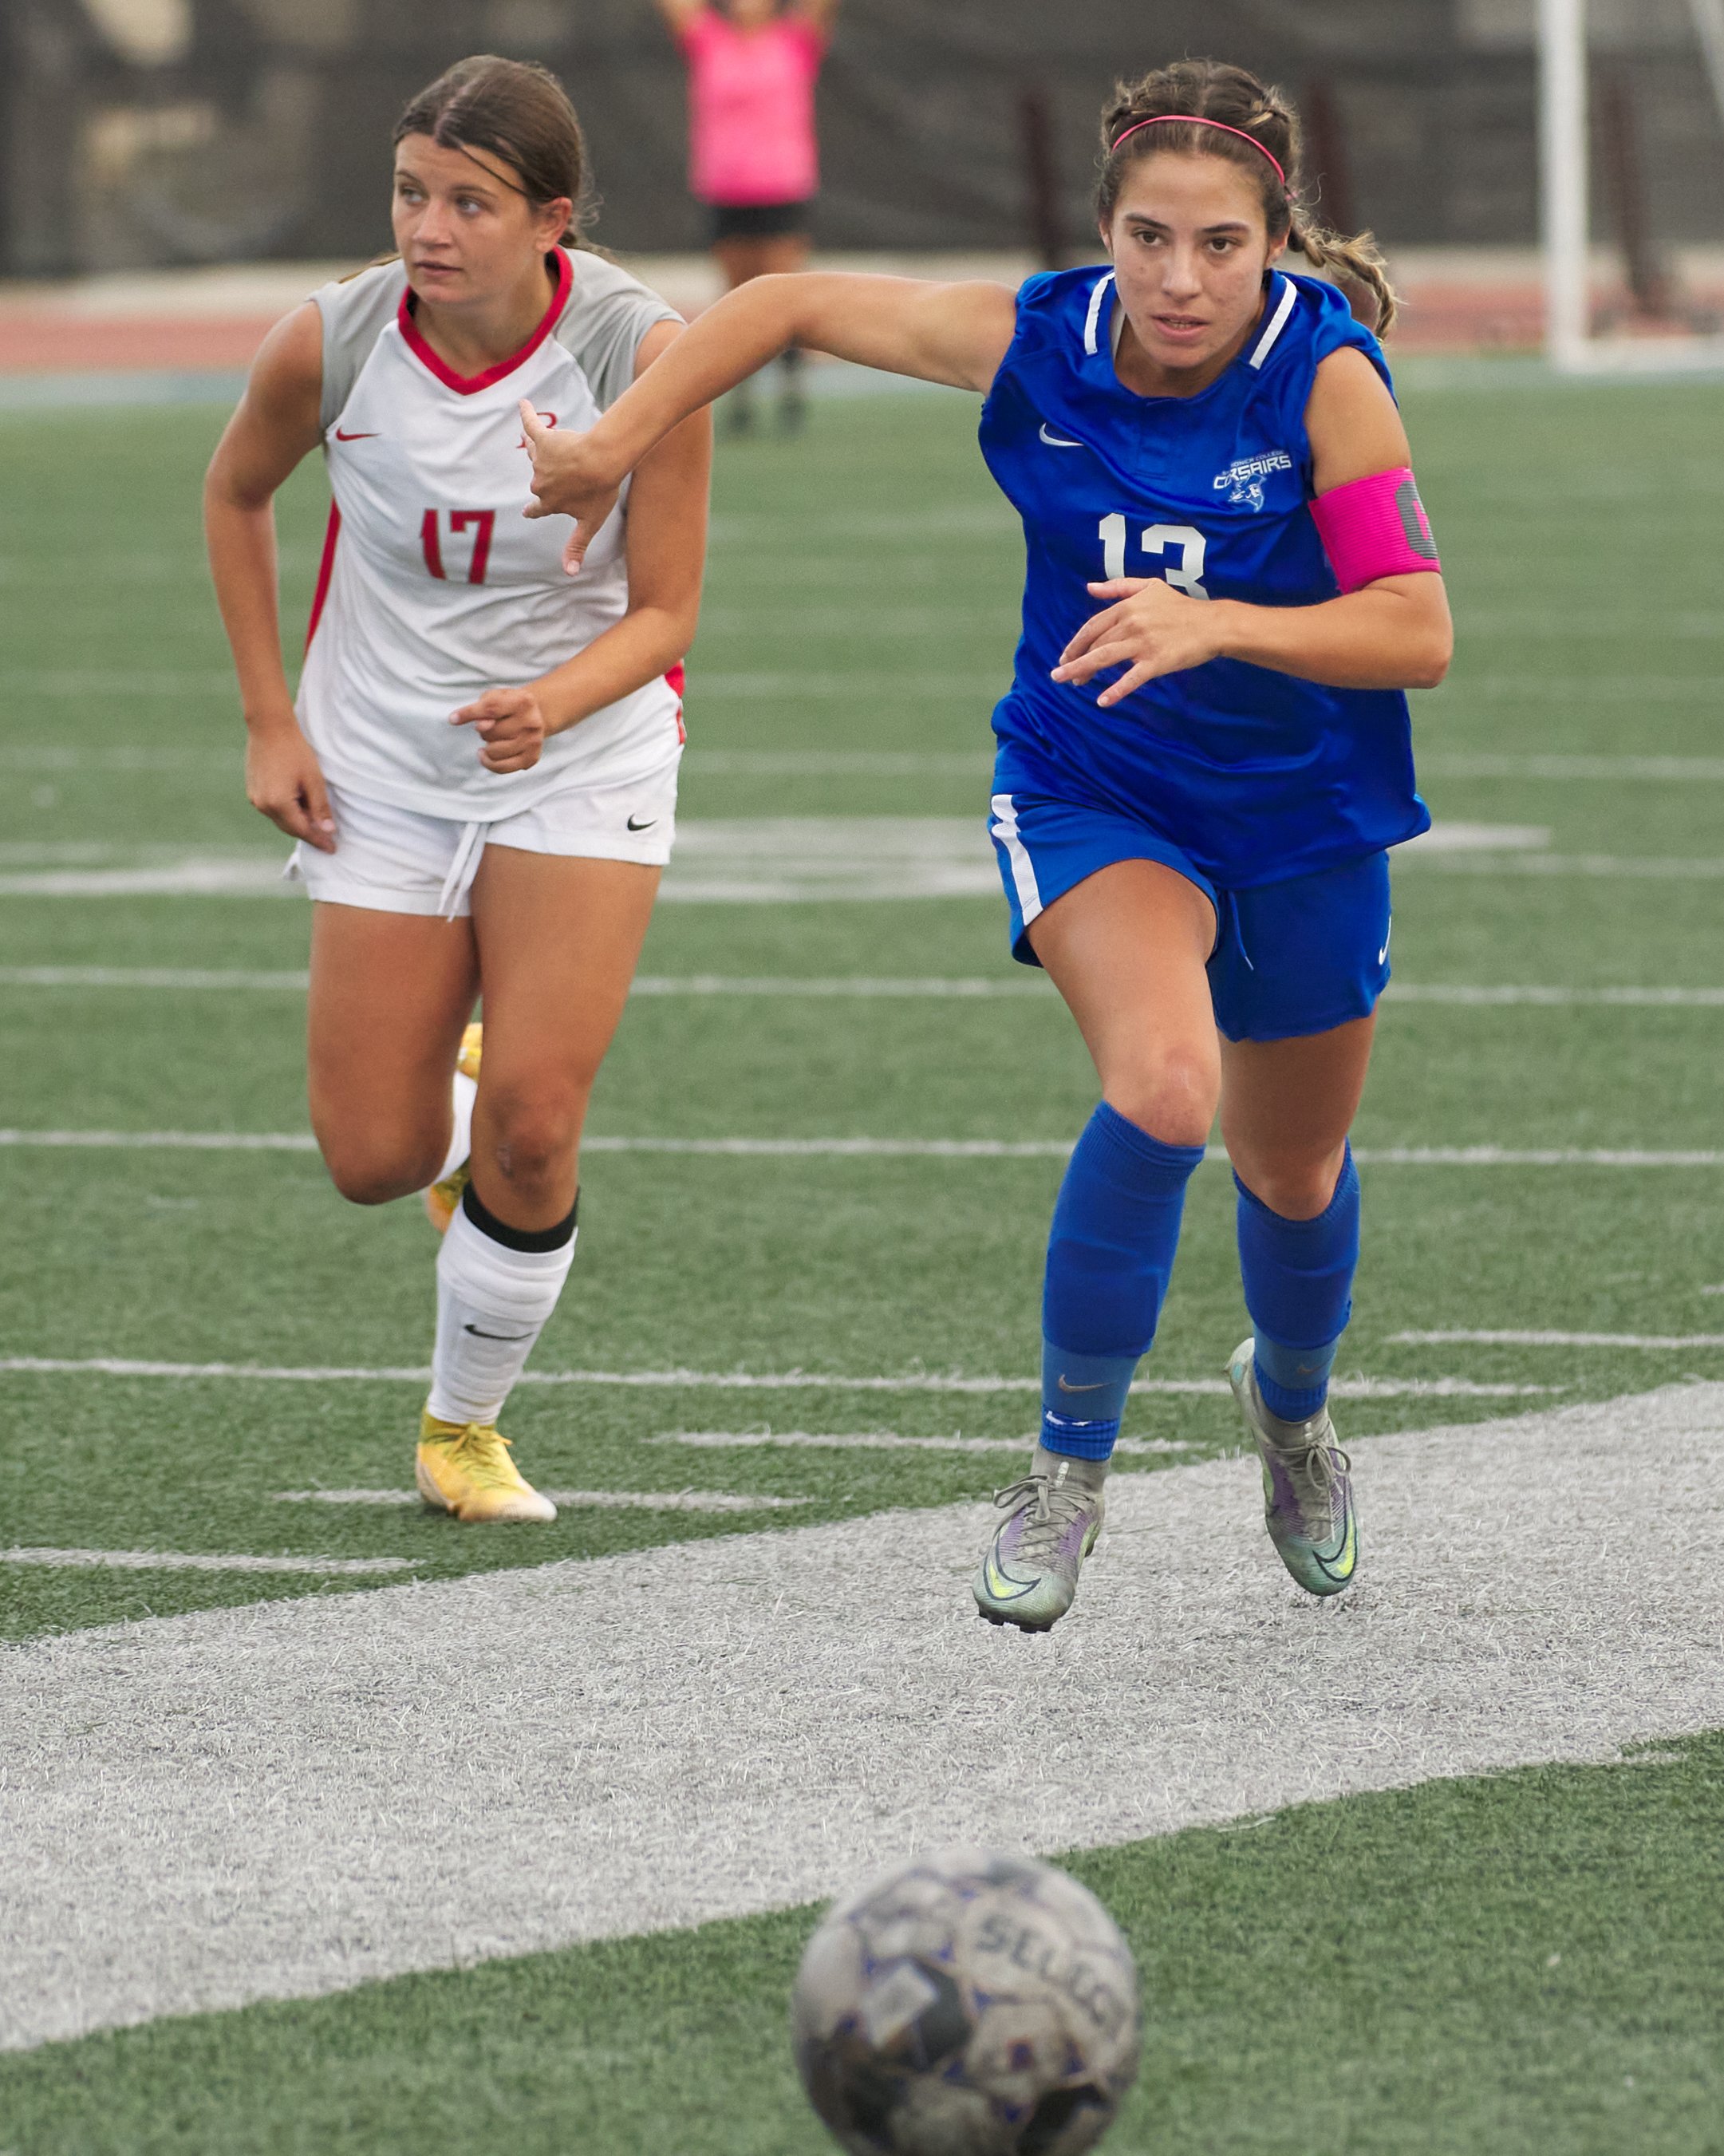  Bakersfield College Renegades' Mariah Myers-Caldarella and Santa Monica College Corsairs' Sophie Doumitt during the women's soccer match on Friday, Oct. 20, 2022, at Corsair Field in Santa Monica, Calif. The Corsairs tied 1-1. (Nicholas McCall | The